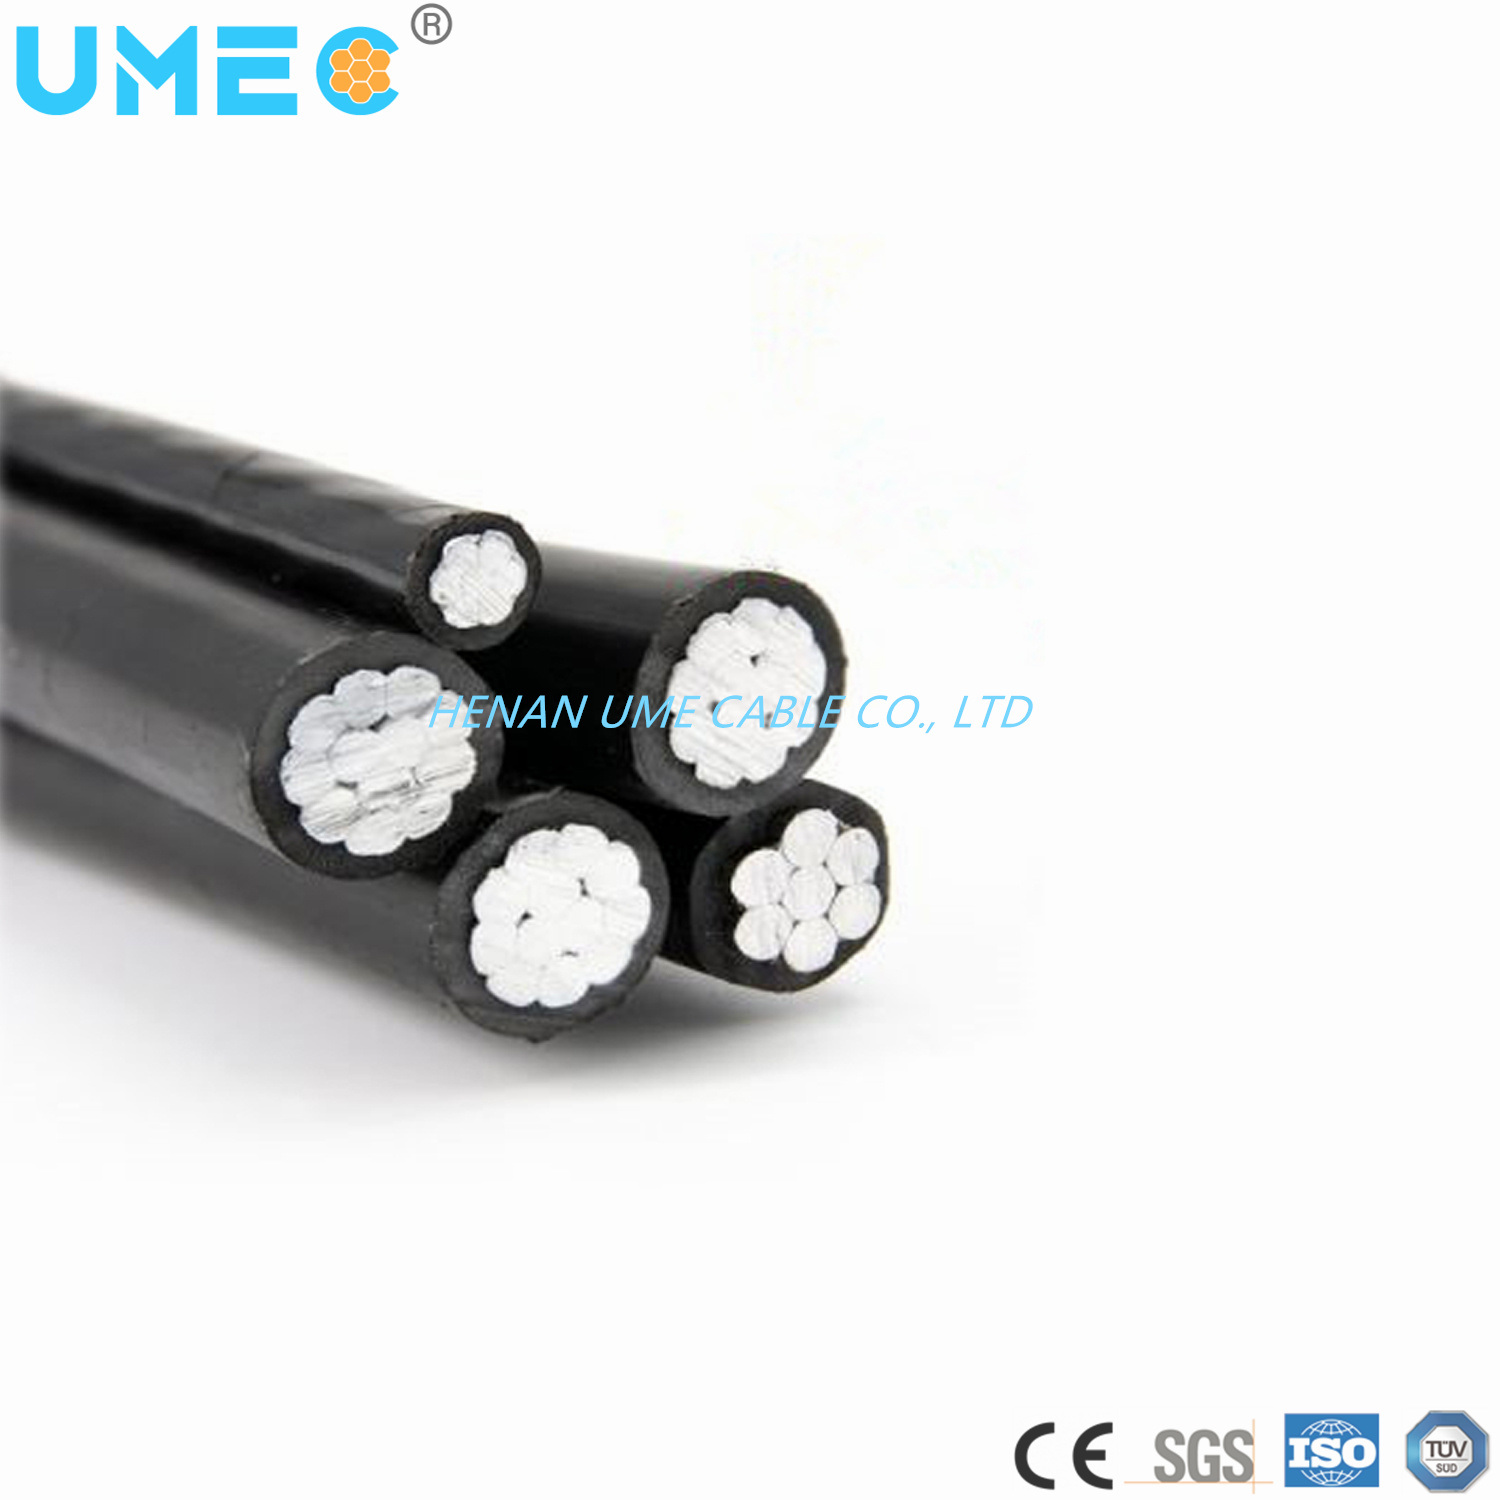 0.6/1kv ABC Cable Overhead Transmission Line Aerial Bundled Caai Cable / Self-Supporting Cable